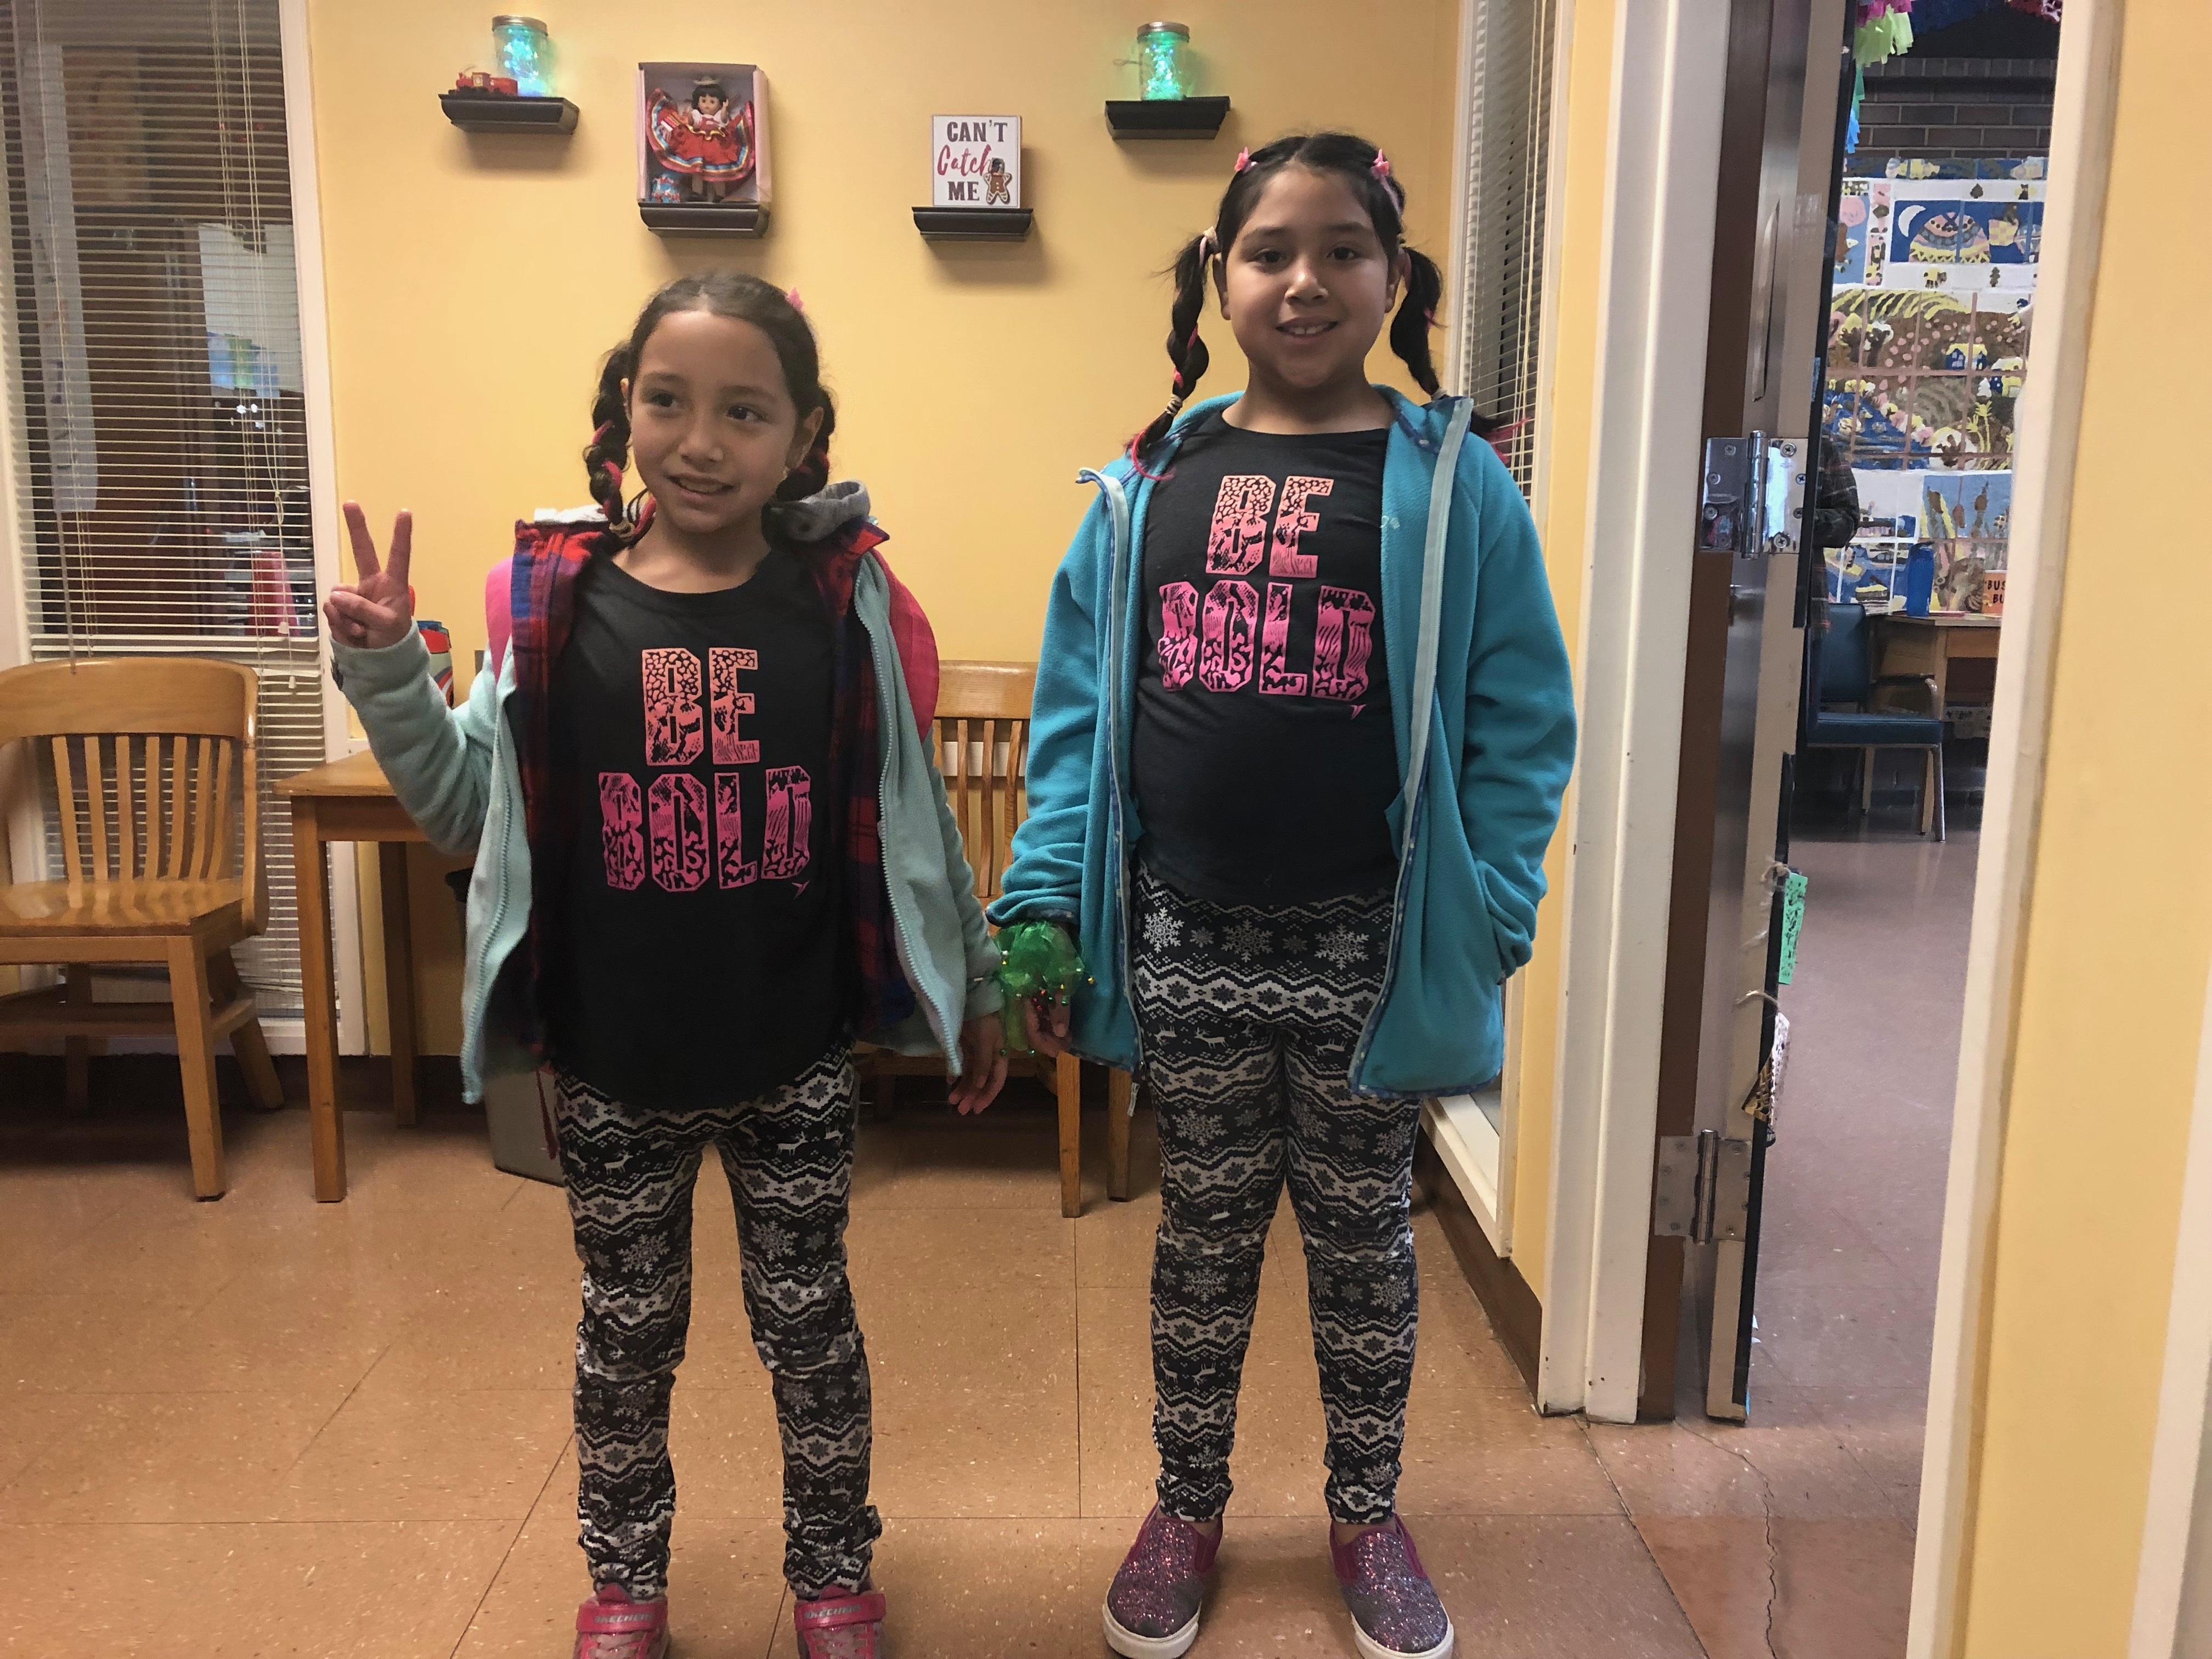 students wearing shirts that say "Be Bold"